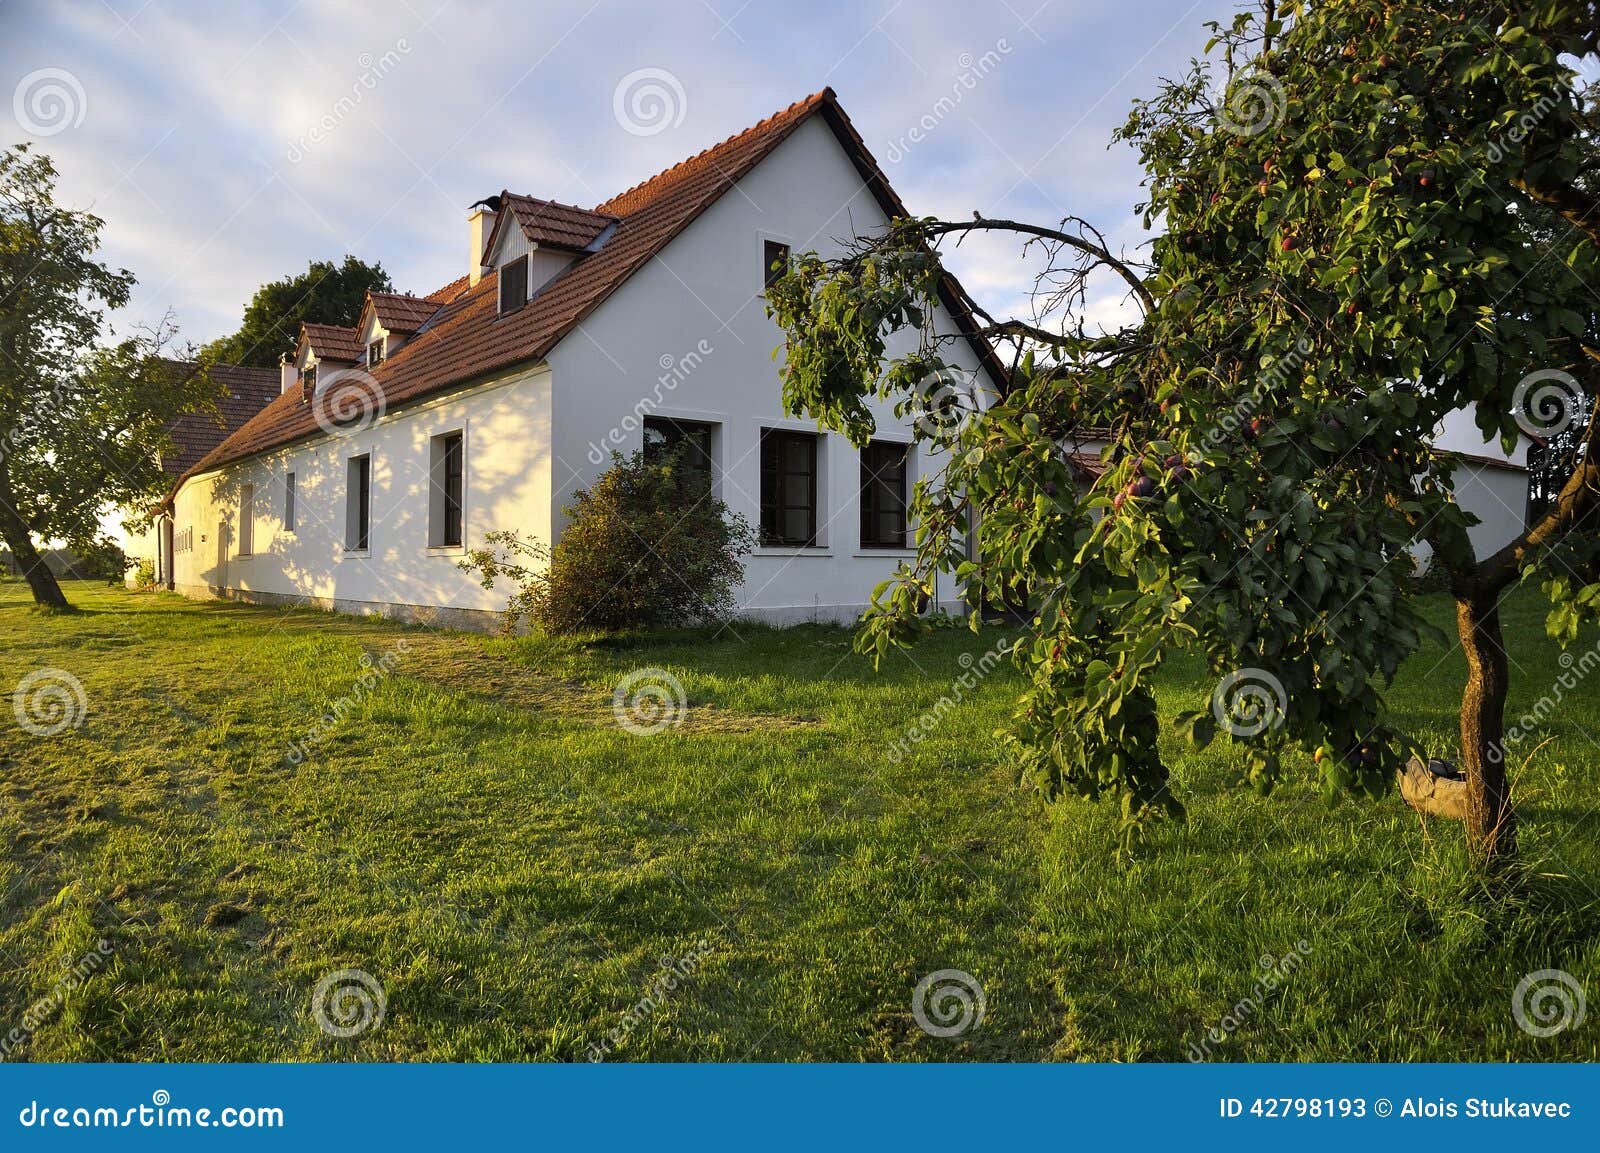 Renovated Village Homestead Surrounded by Fruit Trees Stock Image ...